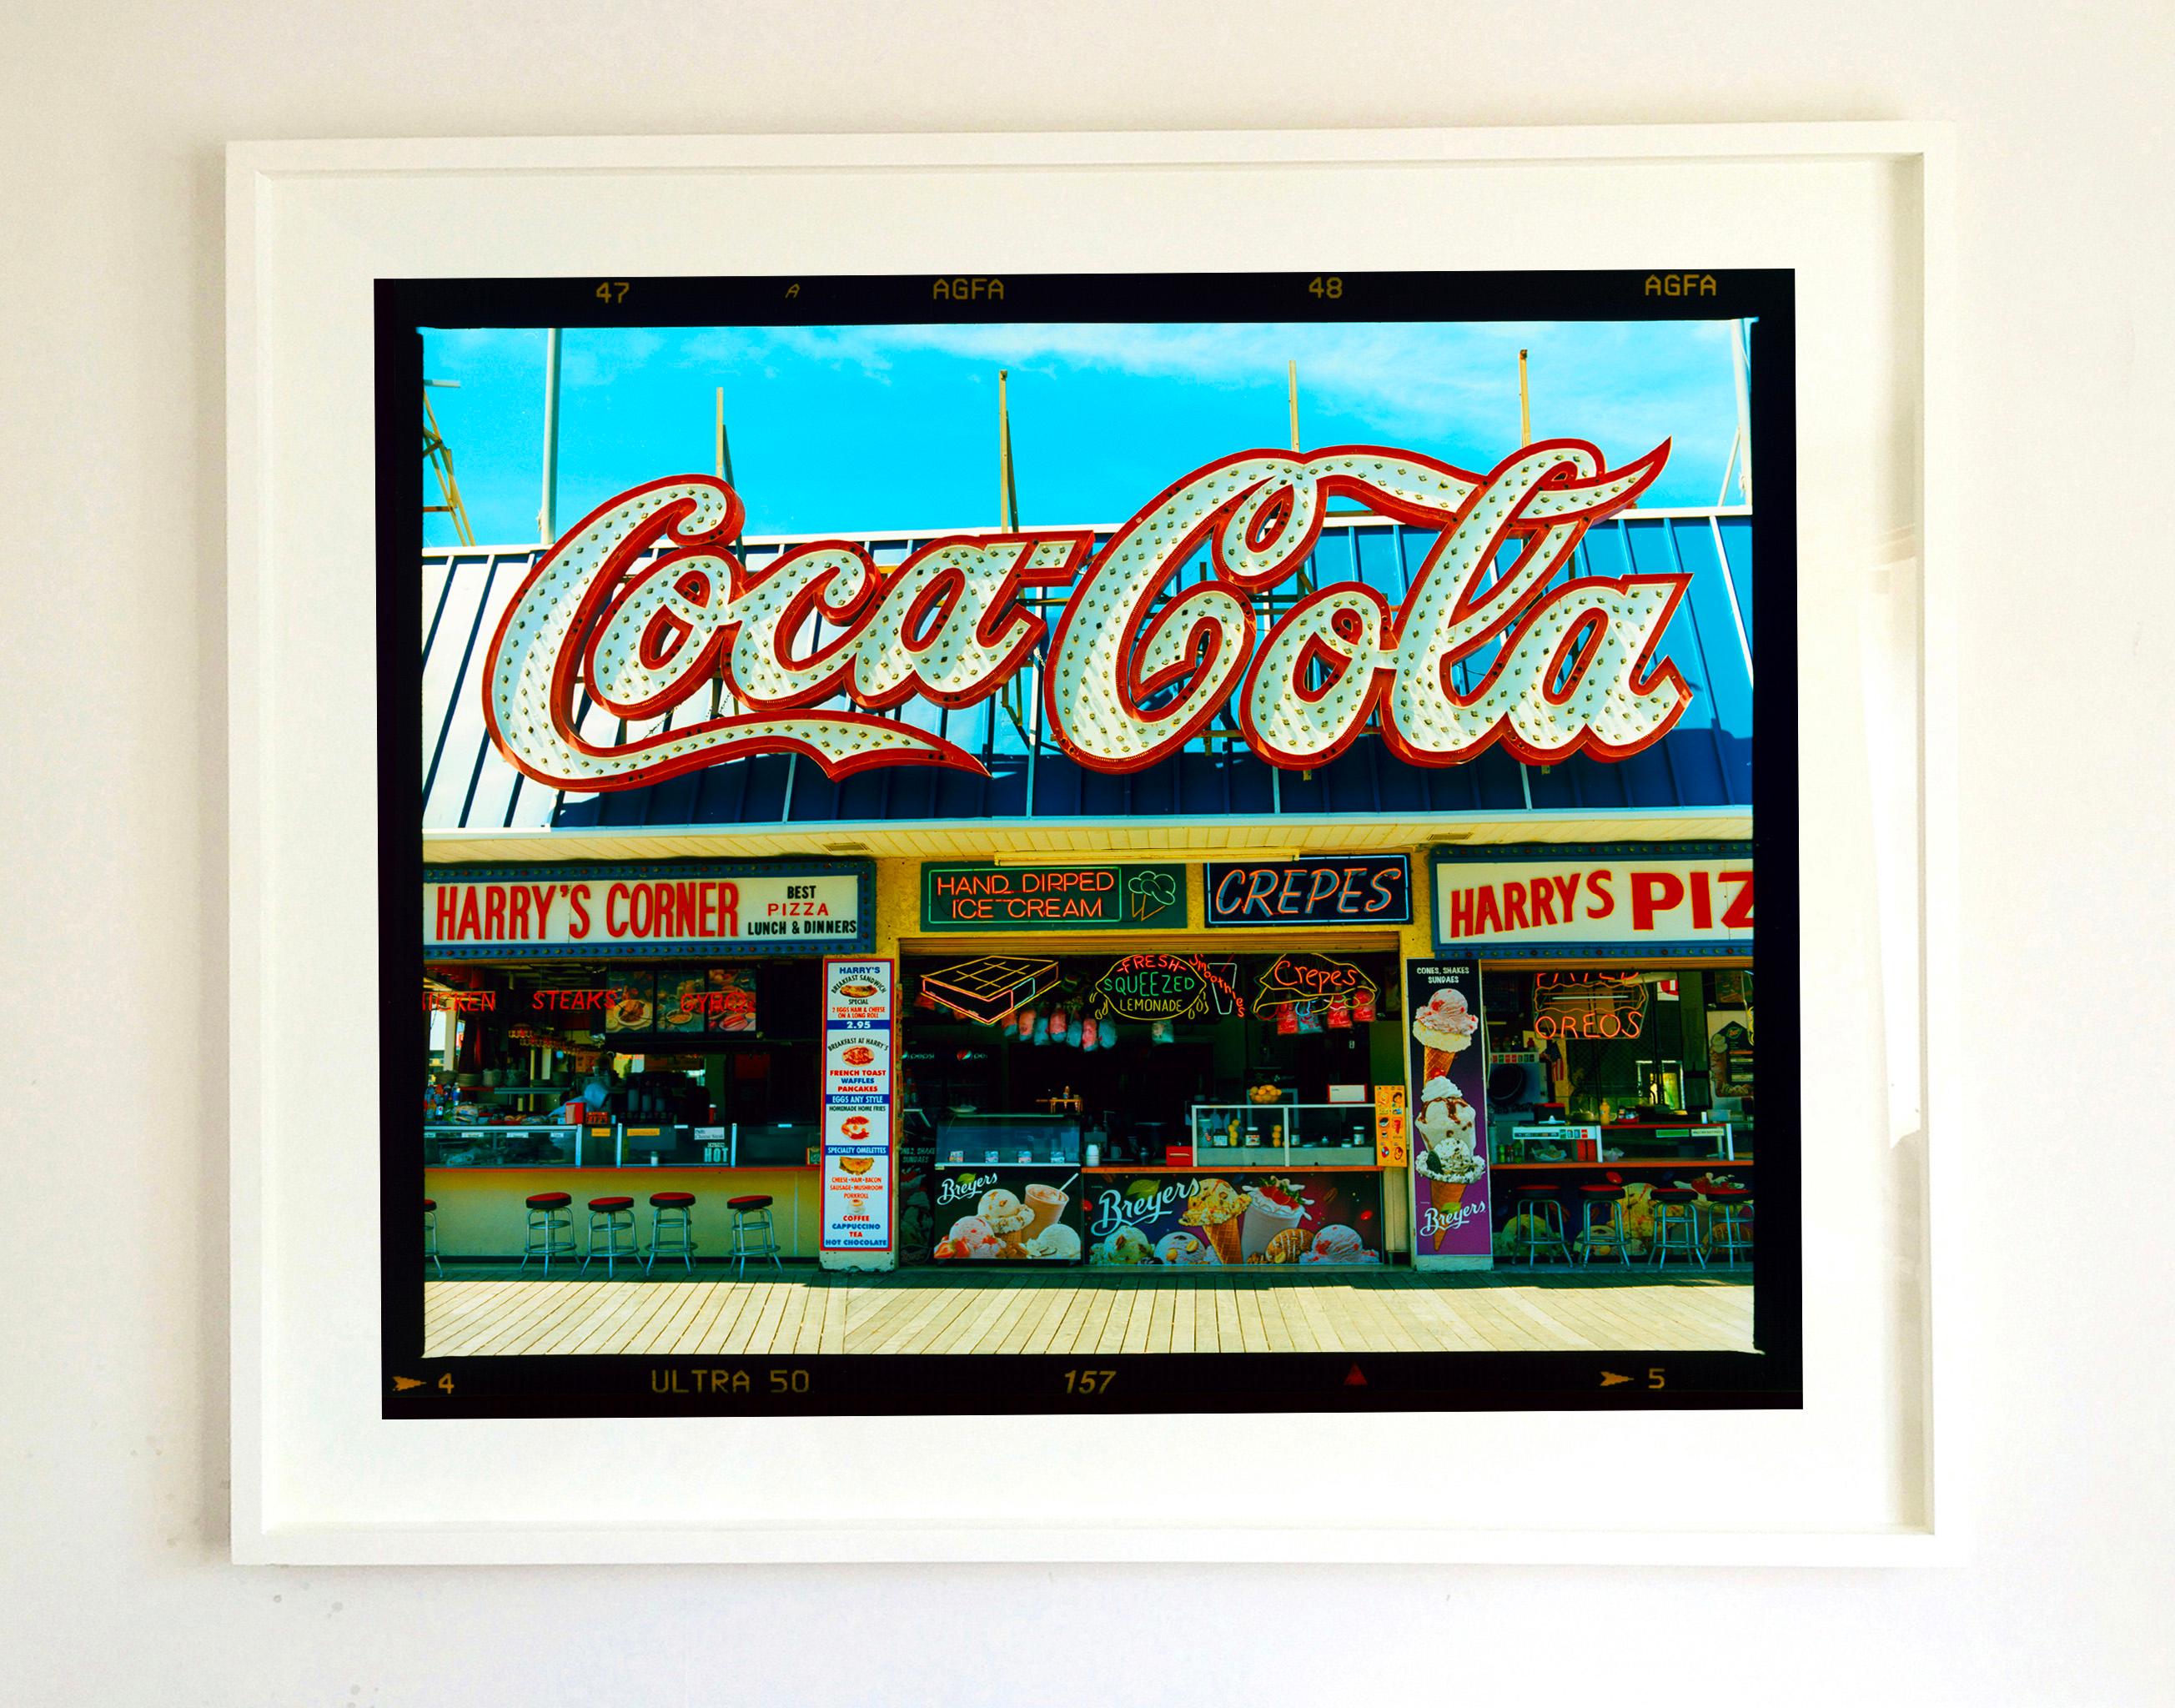 Harry's Corner, on the Wildwood Boardwalk. Taken in April 2013, this picture was first executed in Richard's darkroom in October 2020, he prints it full frame showing the AGFA Ultra film rebate. 
The artwork captures the many details of seaside